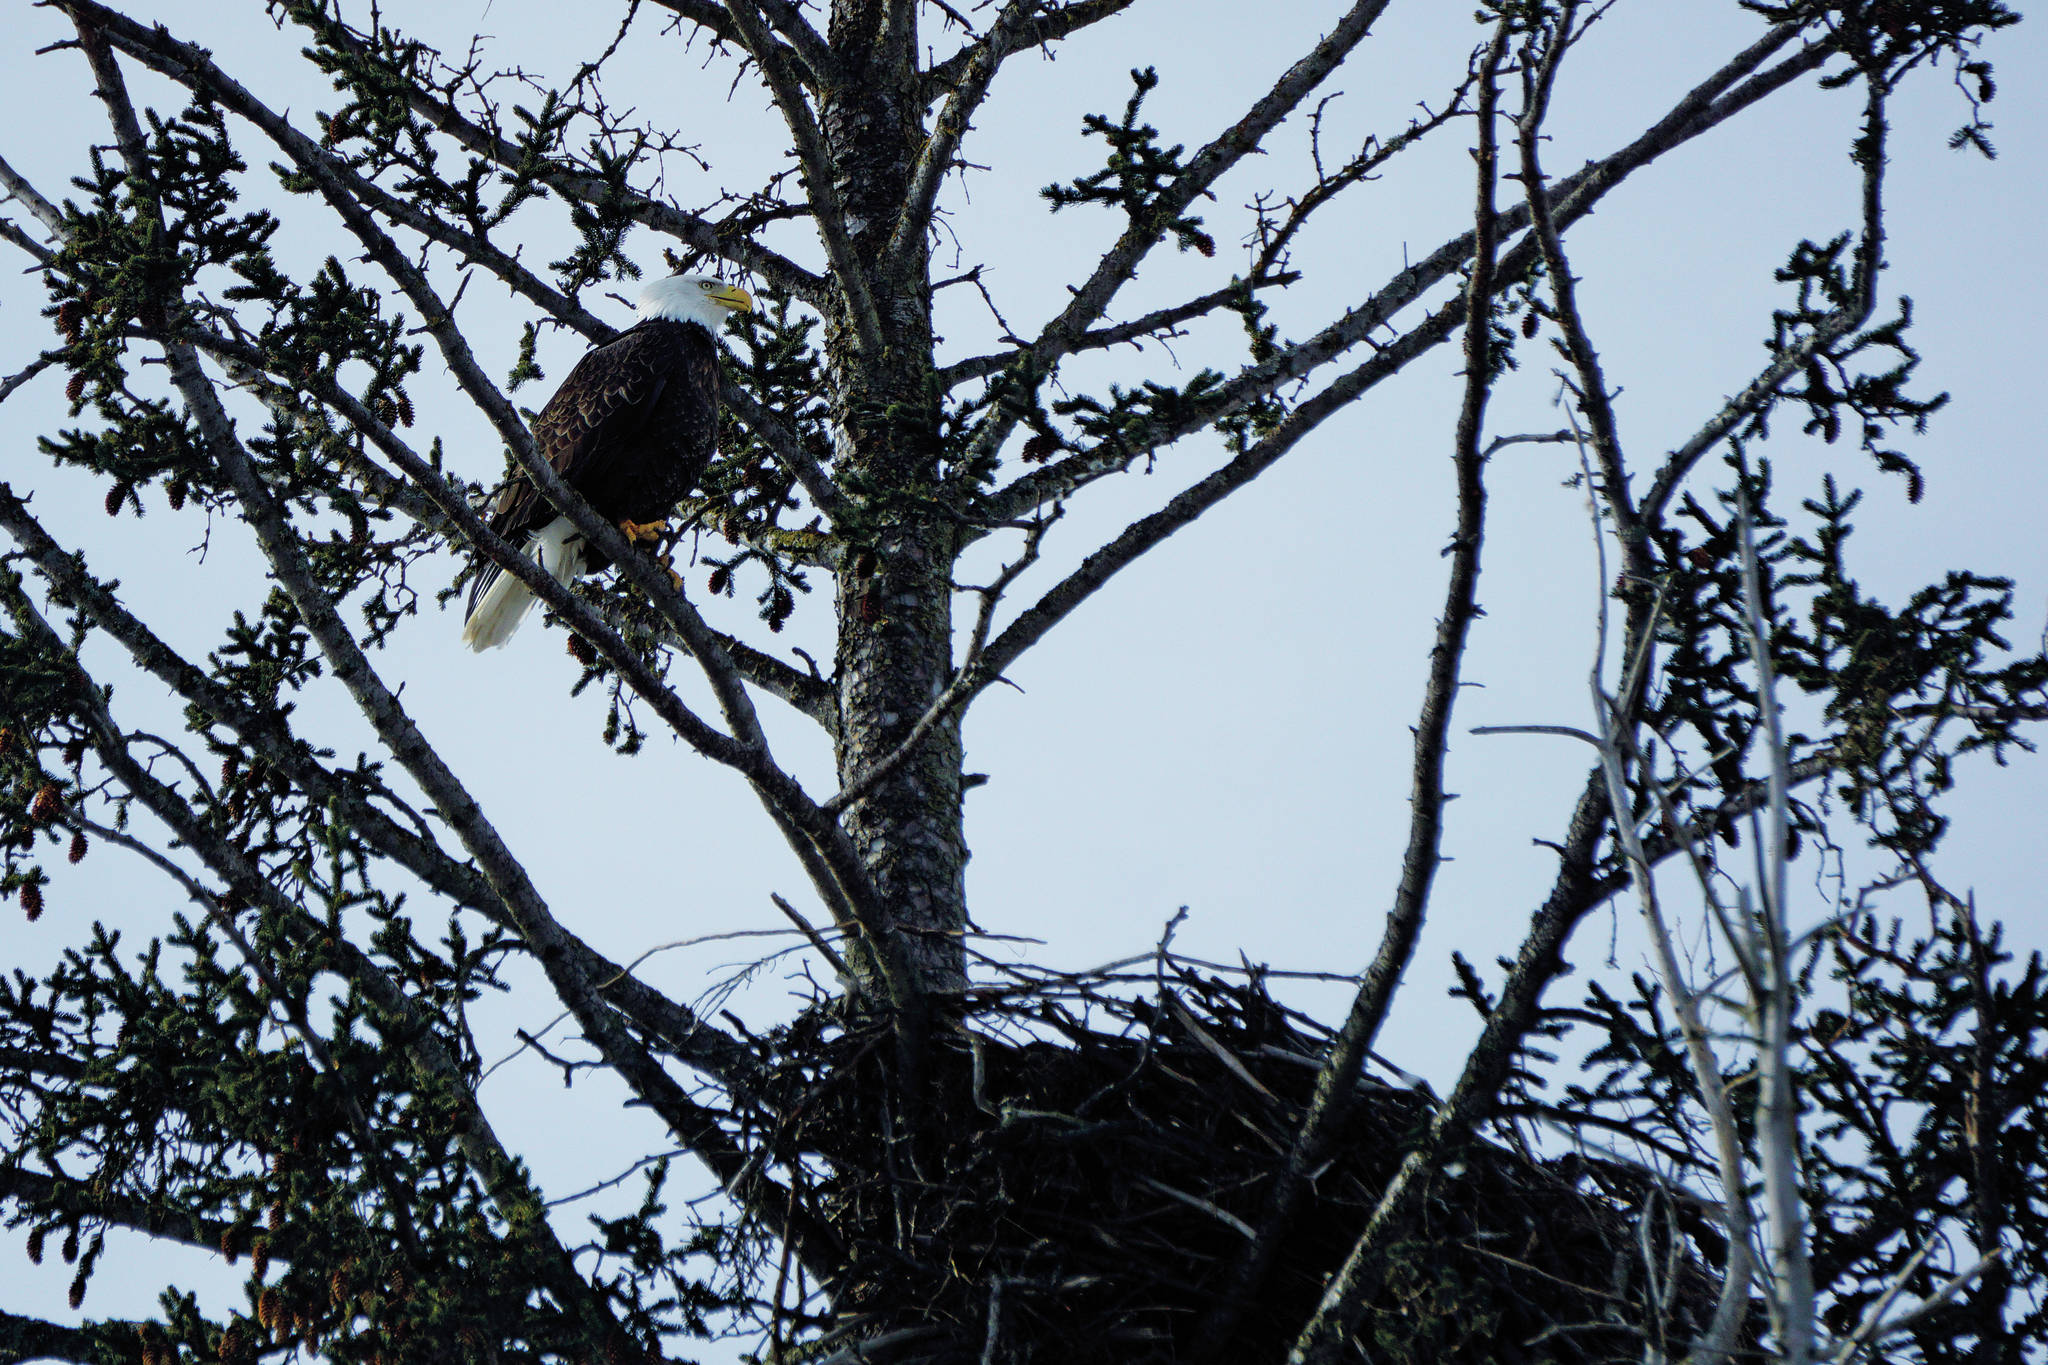 A bald eagle perches in a spruce tree near the Lake Street stoplight on Thursday, March 11, 2021, in Homer, Alaska. Since 2010, a pair of bald eagles has nested in the area near Beluga Slough south of the Lake Street and Sterling Highway intersection. The first nest was destroyed when the tree fell down in a winter storm in 2011. In 2012 the eagles built a new nest across from the Homer Post Office by the motorhome dump station. In 2014 they built another nest in a new tree closer to the slough. This year’s eagles have returned to a nest built in 2016 just east of the 2014-2015 nest.